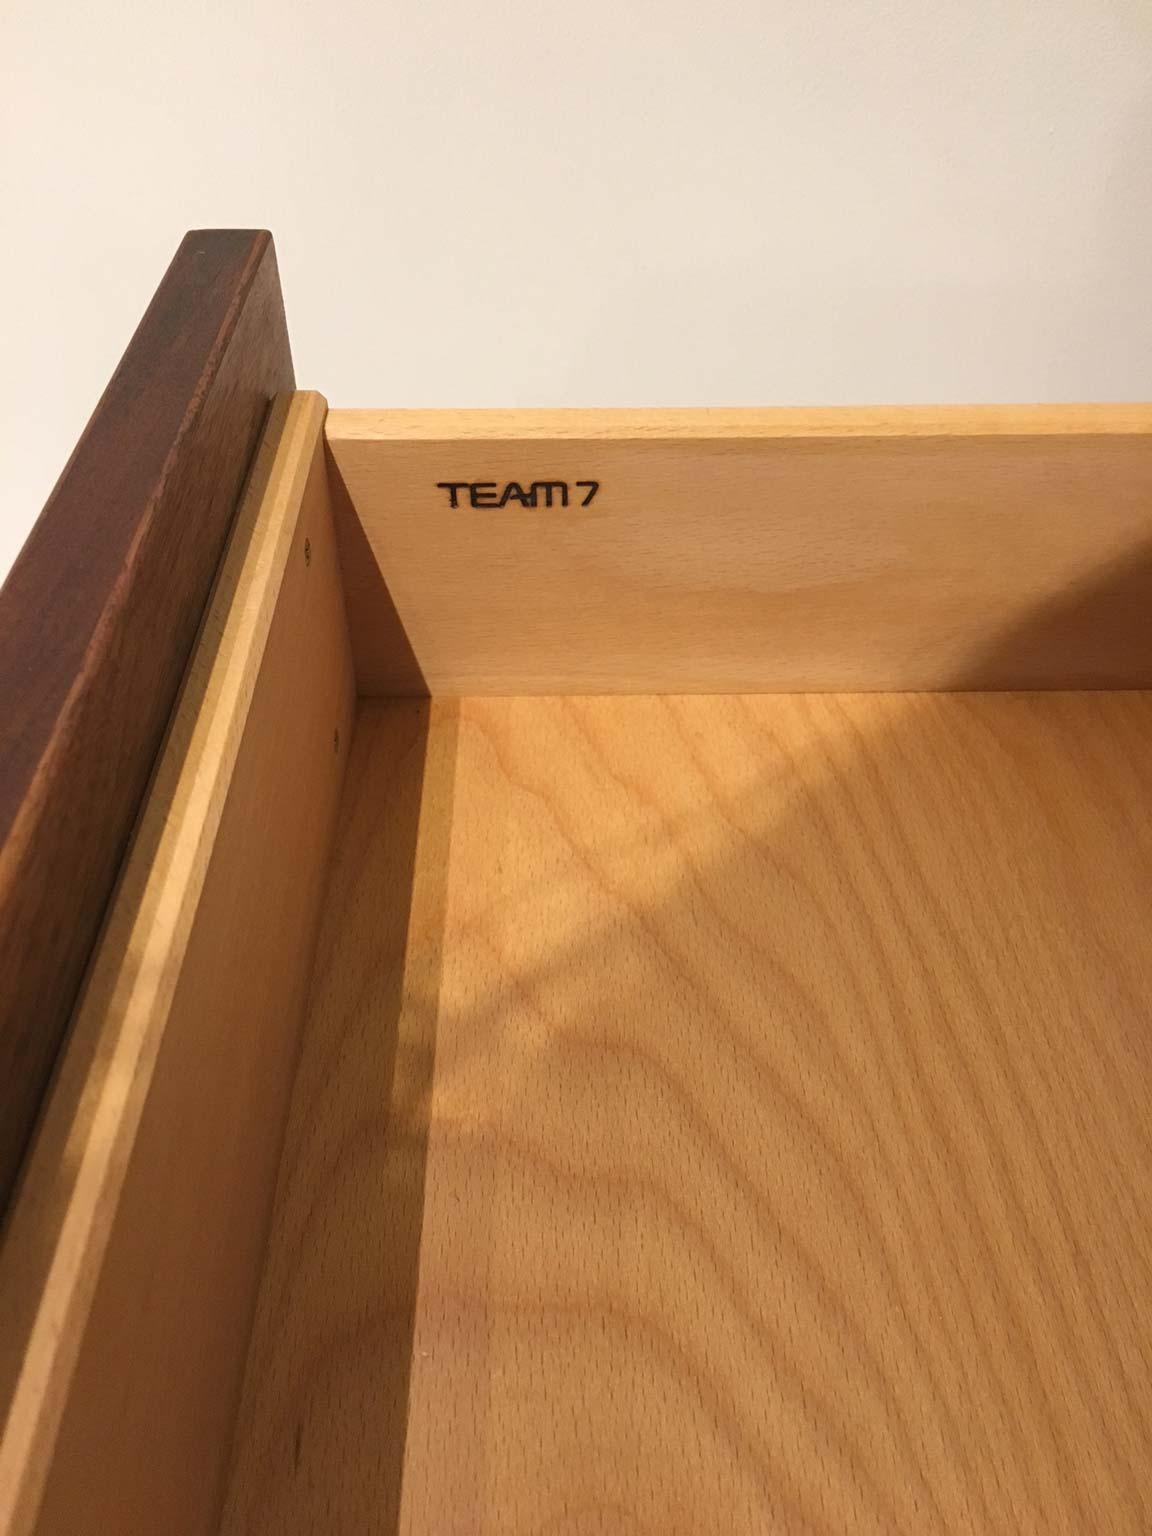 Brushed Solid Walnut Wood Dresser with Matt Stainless Steel Flap Handles by Team 7